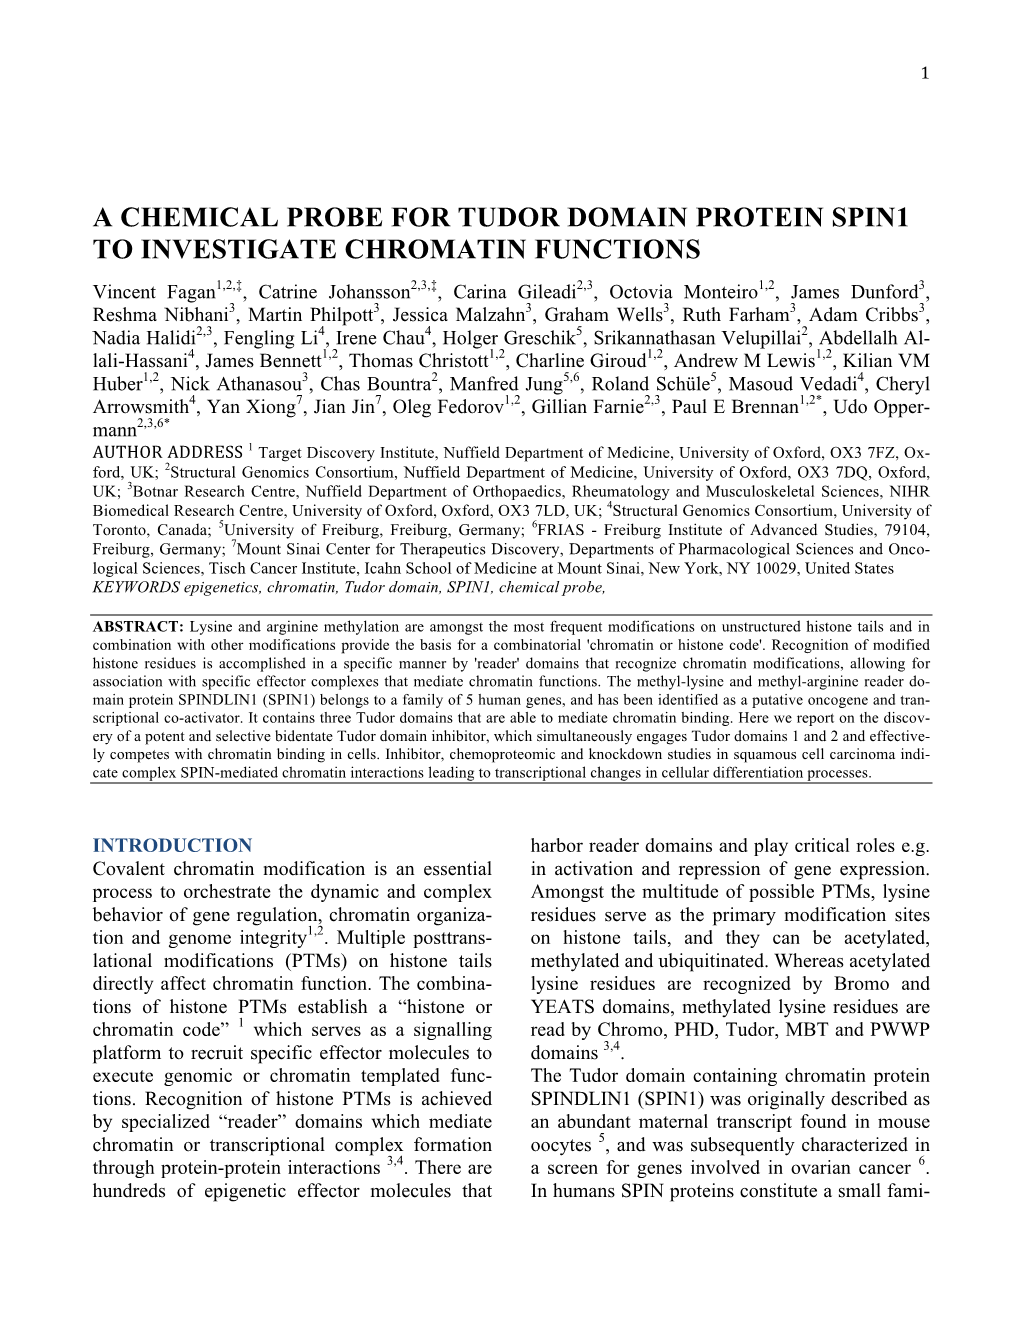 A Chemical Probe for Tudor Domain Protein Spin1 To